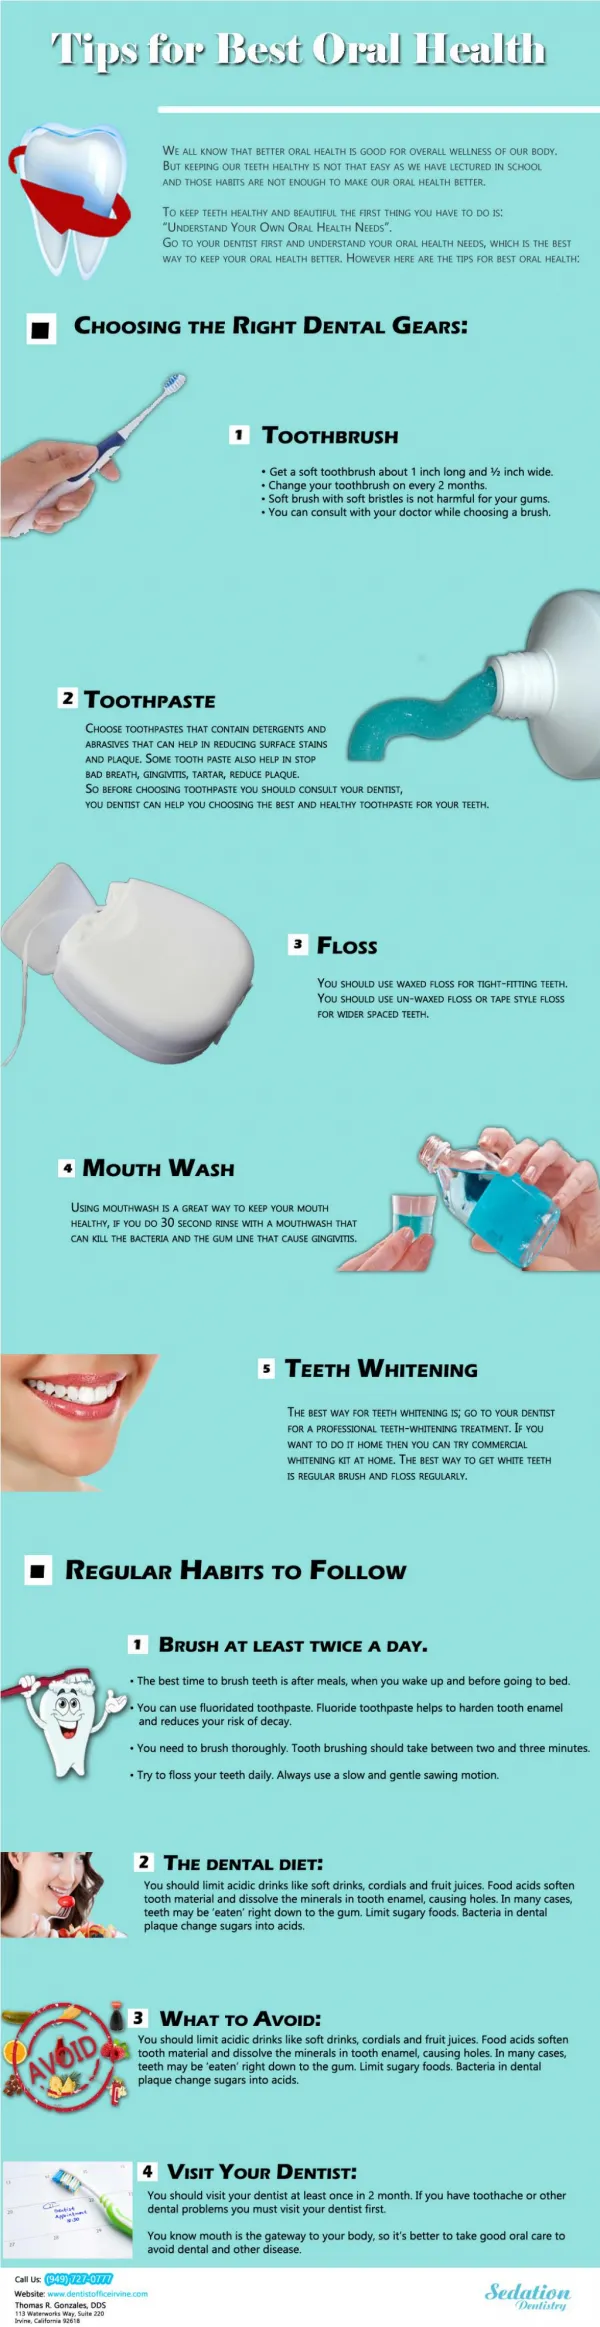 Tips for Best Oral Health